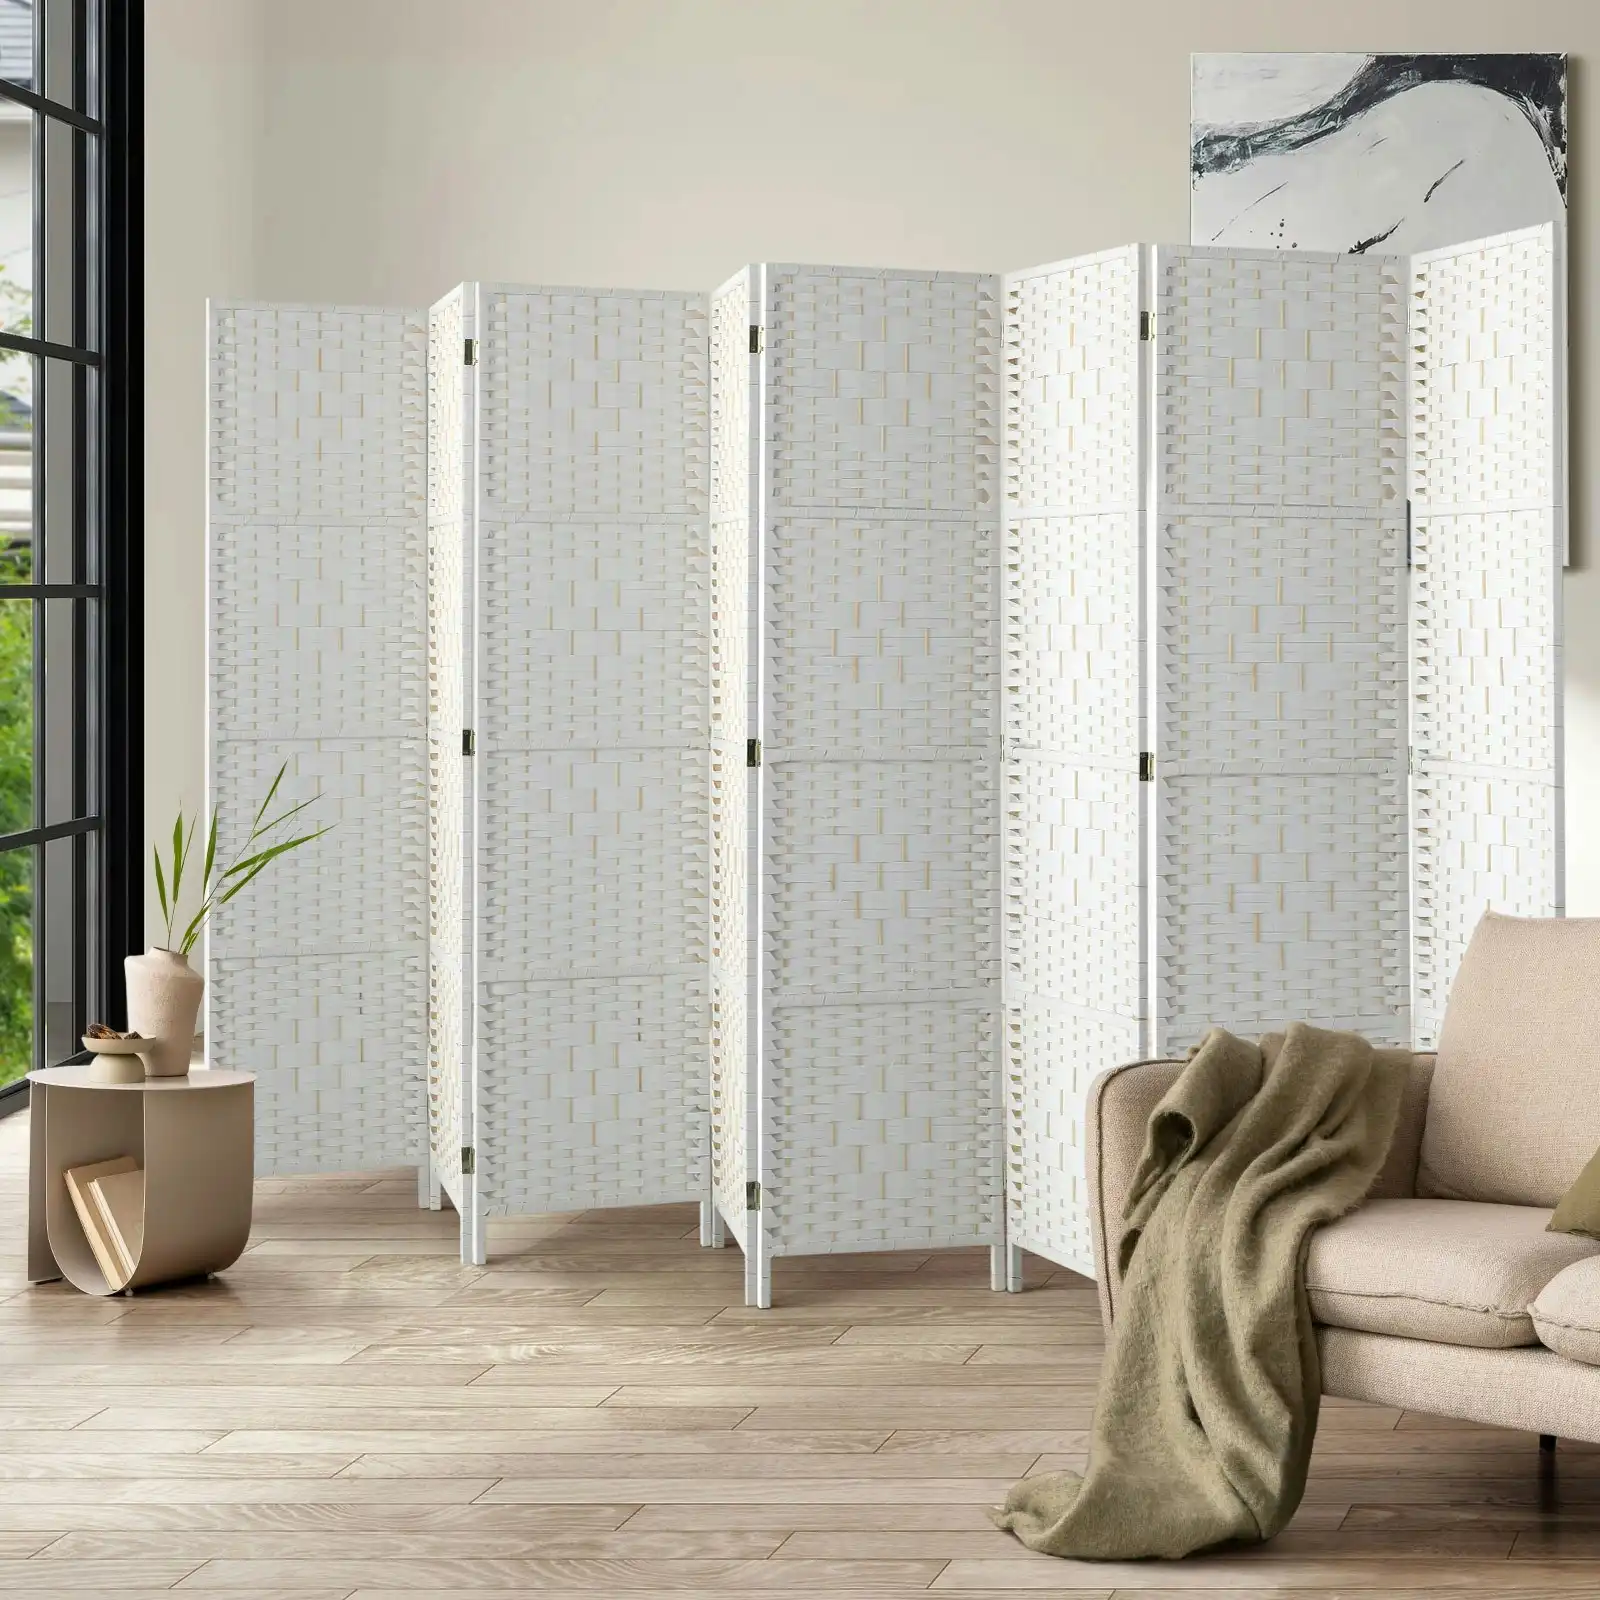 Oikiture 8 Panel Room Divider Screen Privacy Dividers Woven Wood Folding White